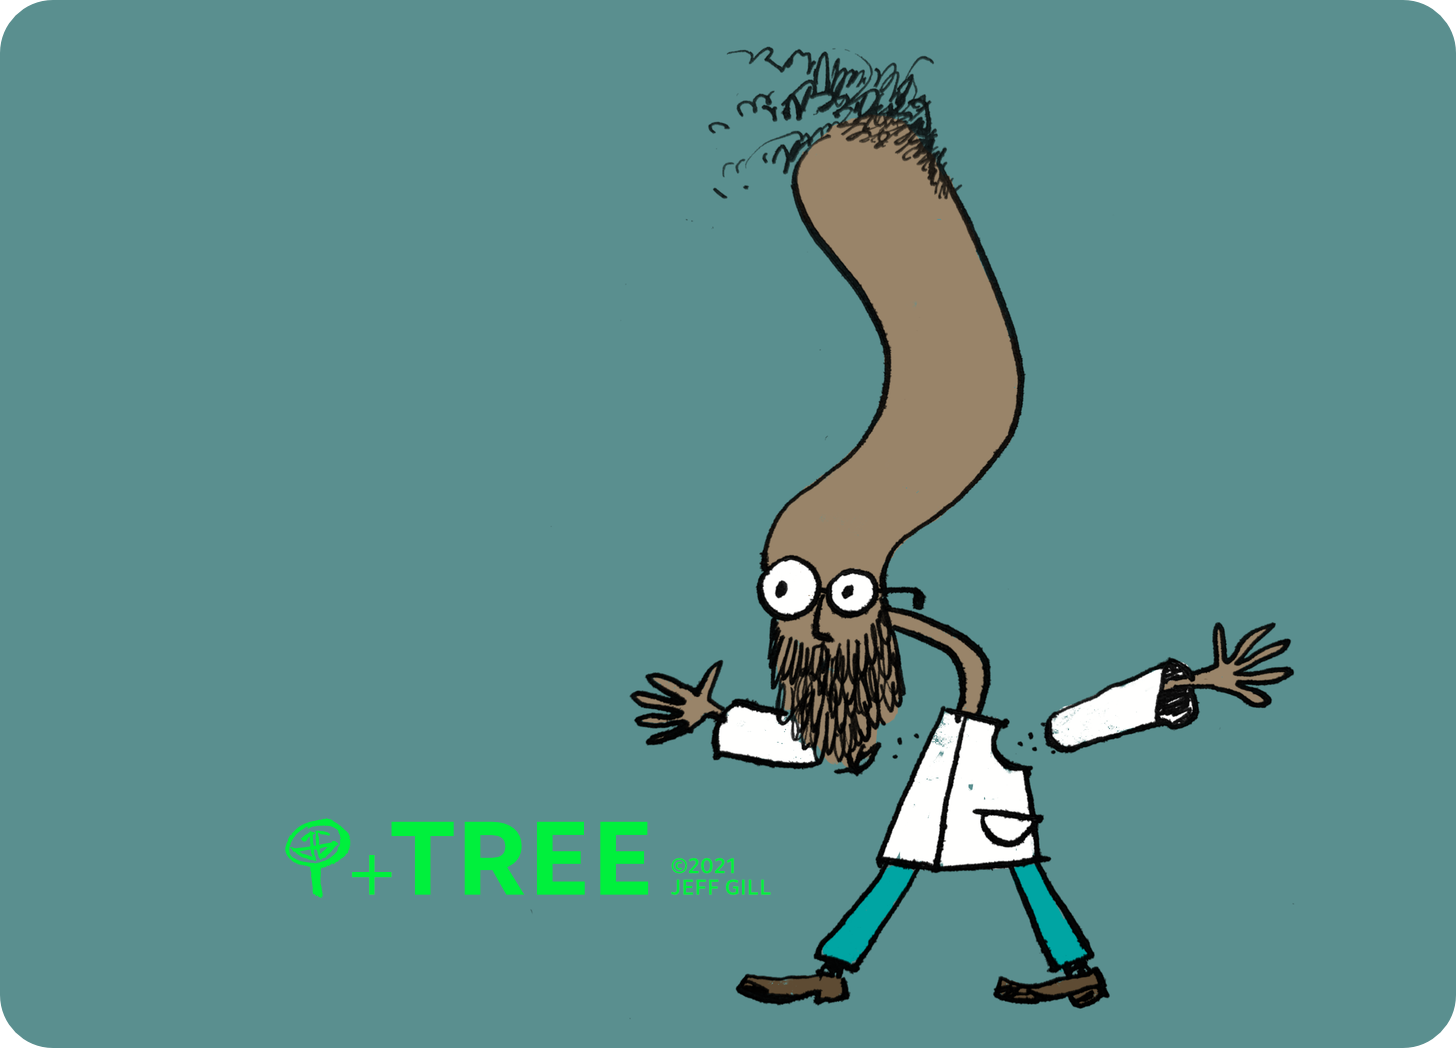 illustration of a scientist – eyes wide in amazement – whose outstretched arms are departing his body